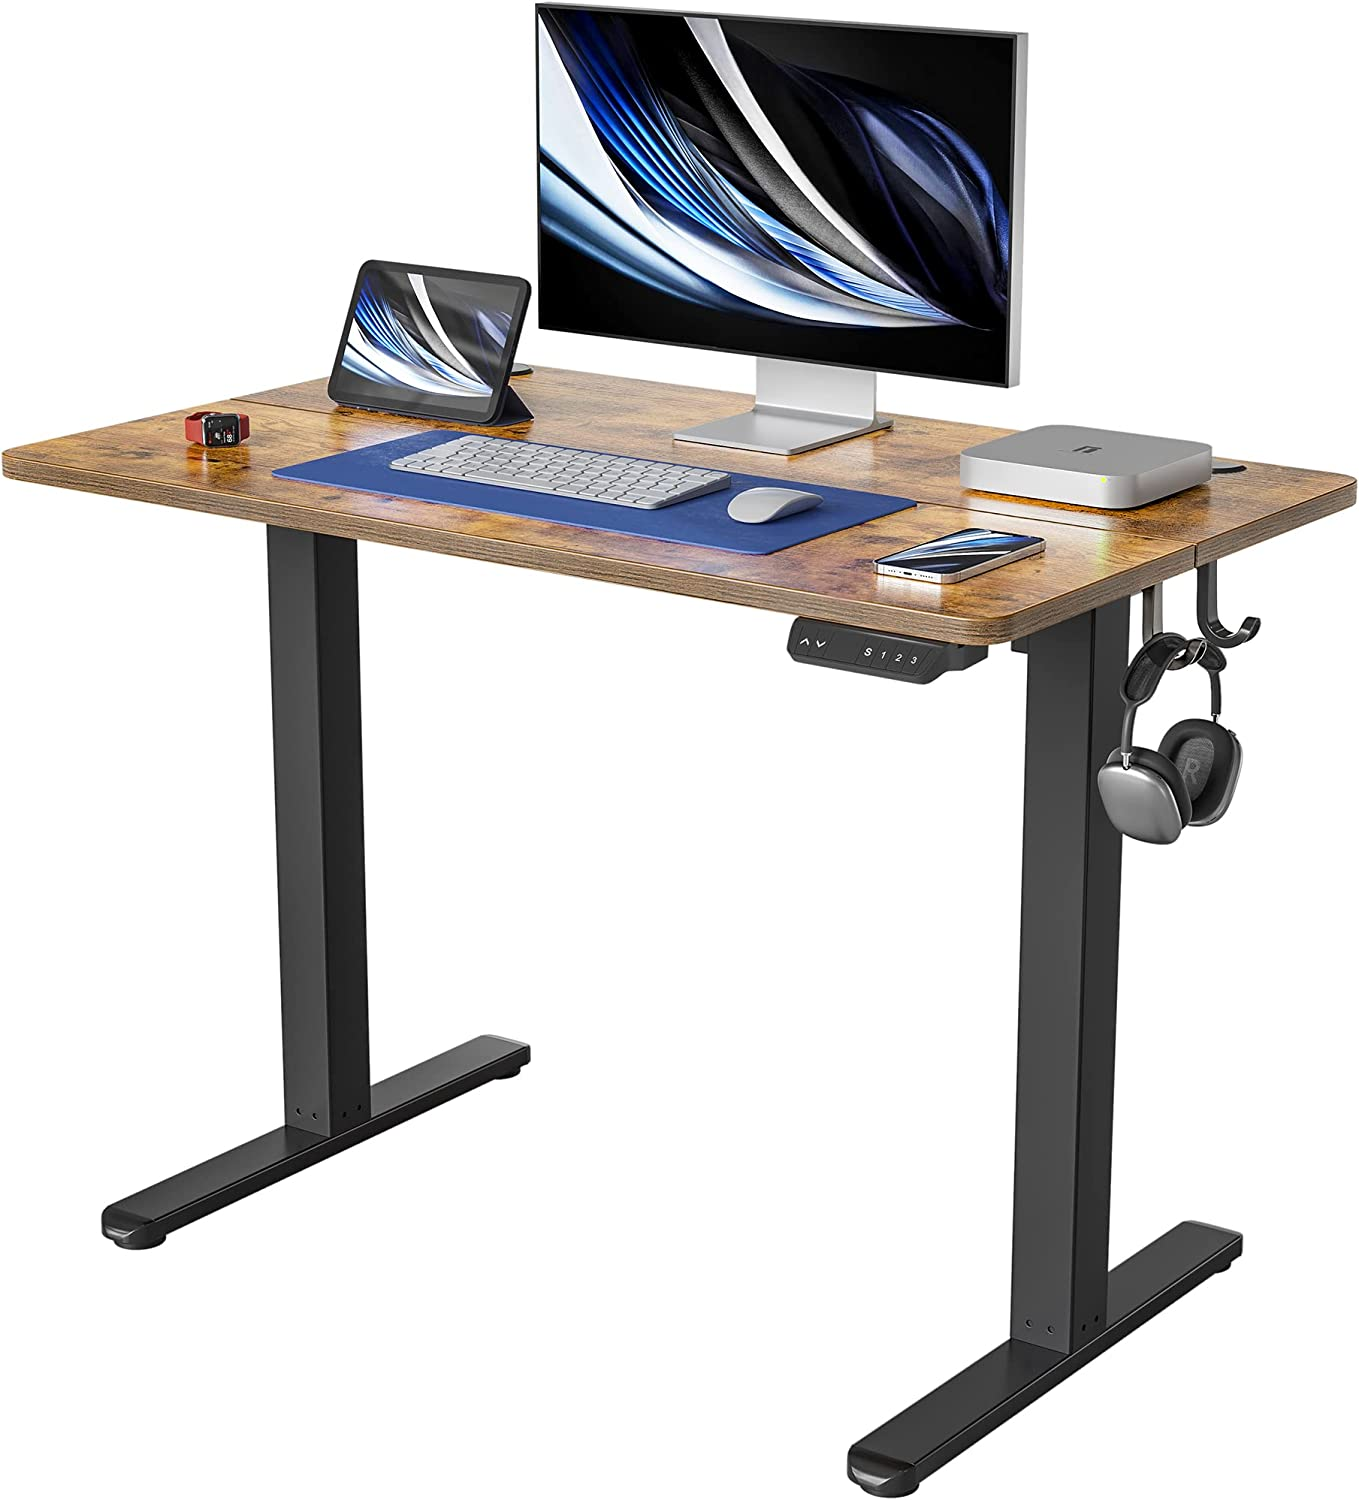 Amazon.com: FEZIBO Height Adjustable Electric Standing Desk, 48 x 24 Inches Stand up Table, Sit Stand Home Office Desk $157.19